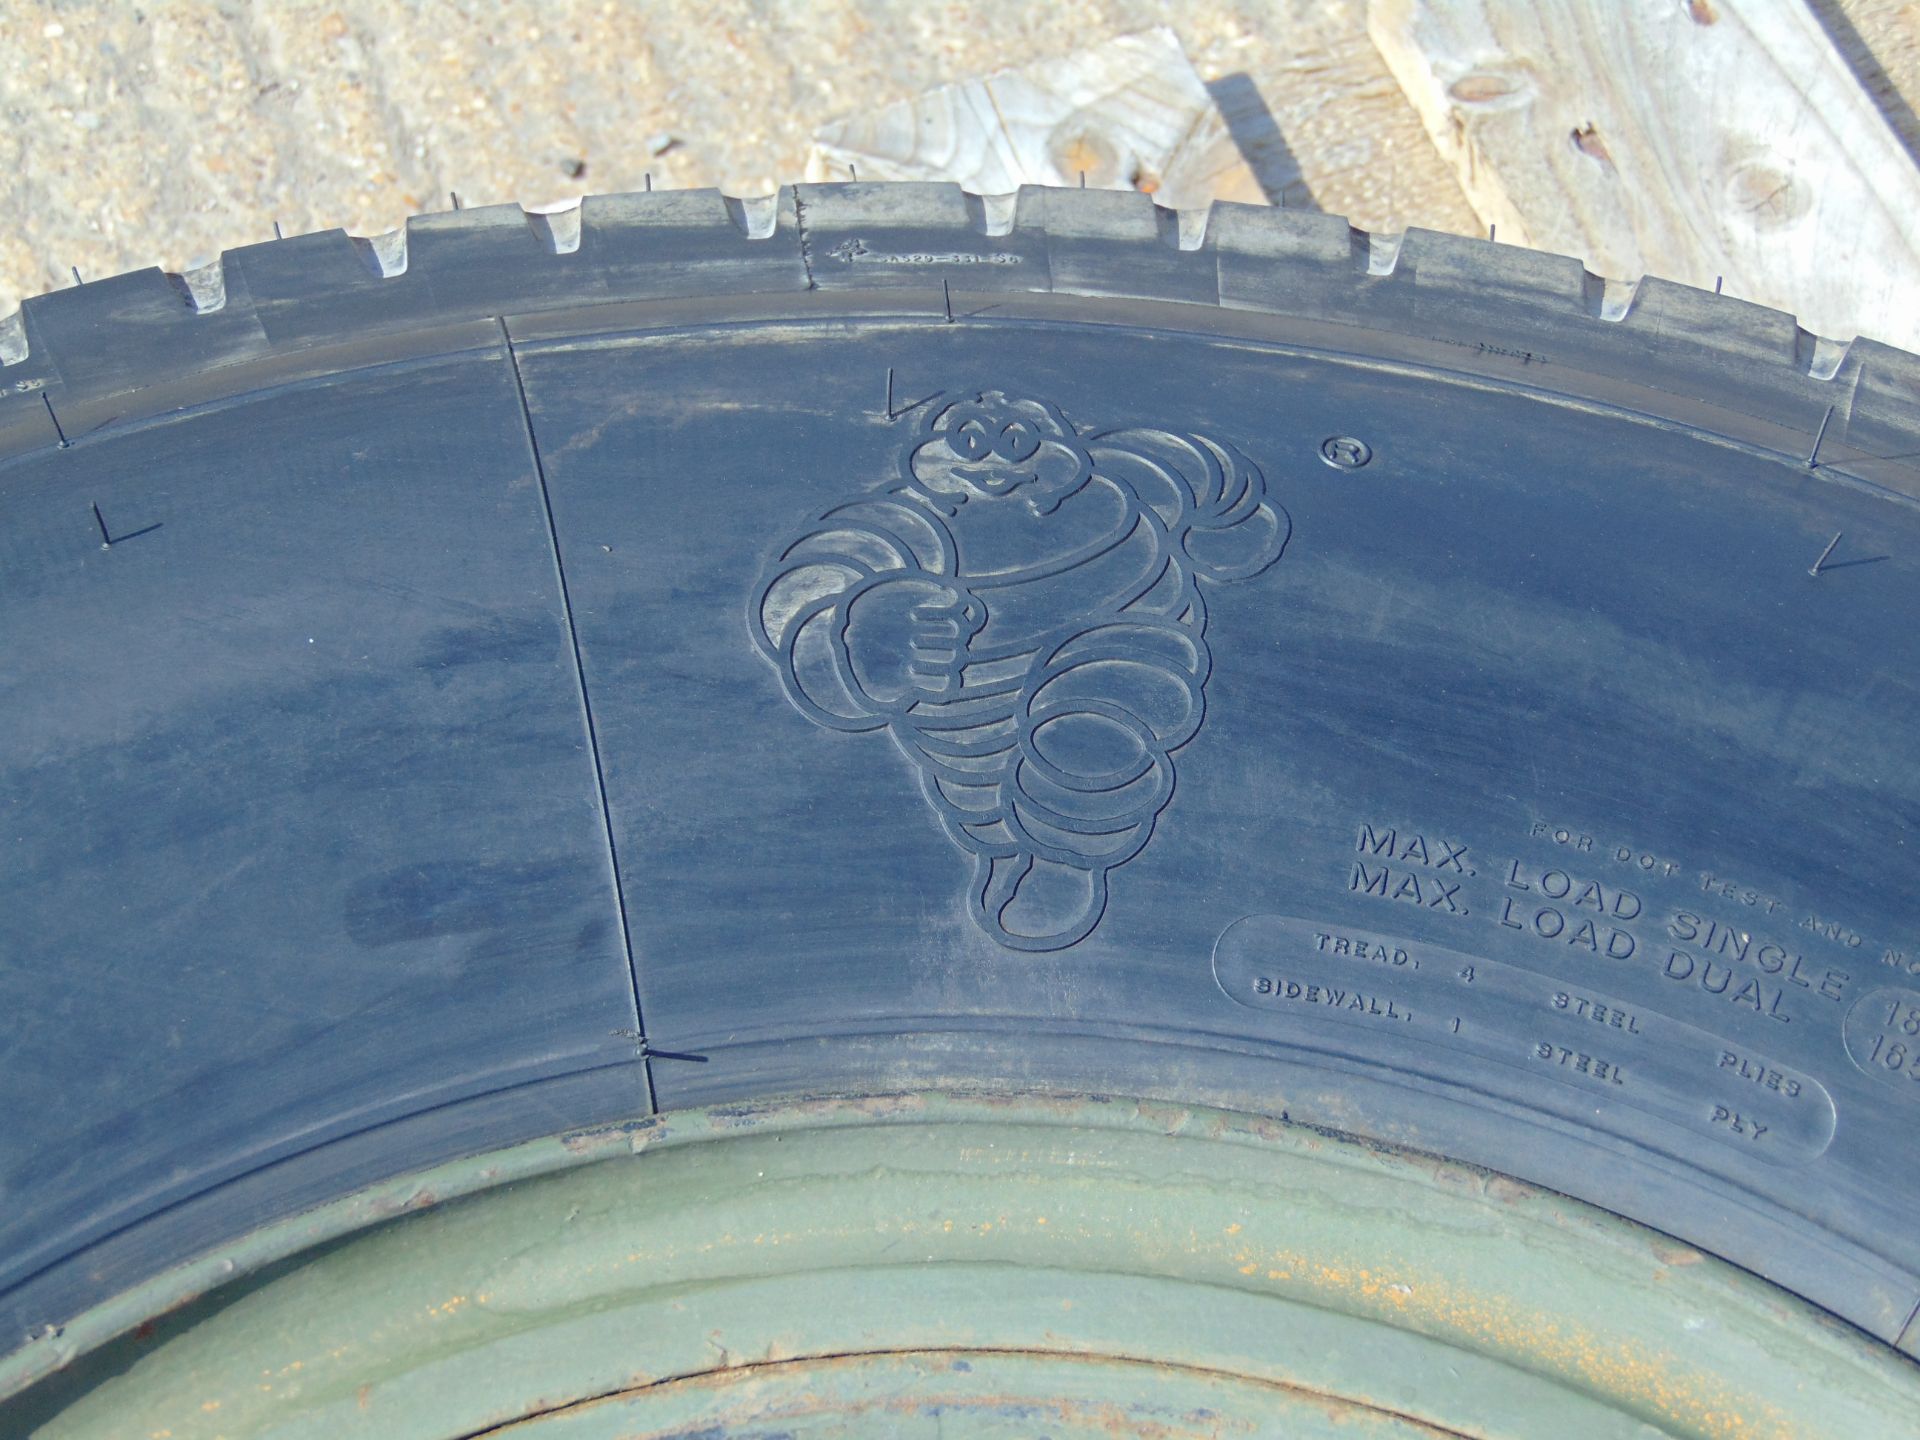 Michelin XZA 8.25 R16 Tyre with 6 Stud Rim - Image 5 of 7